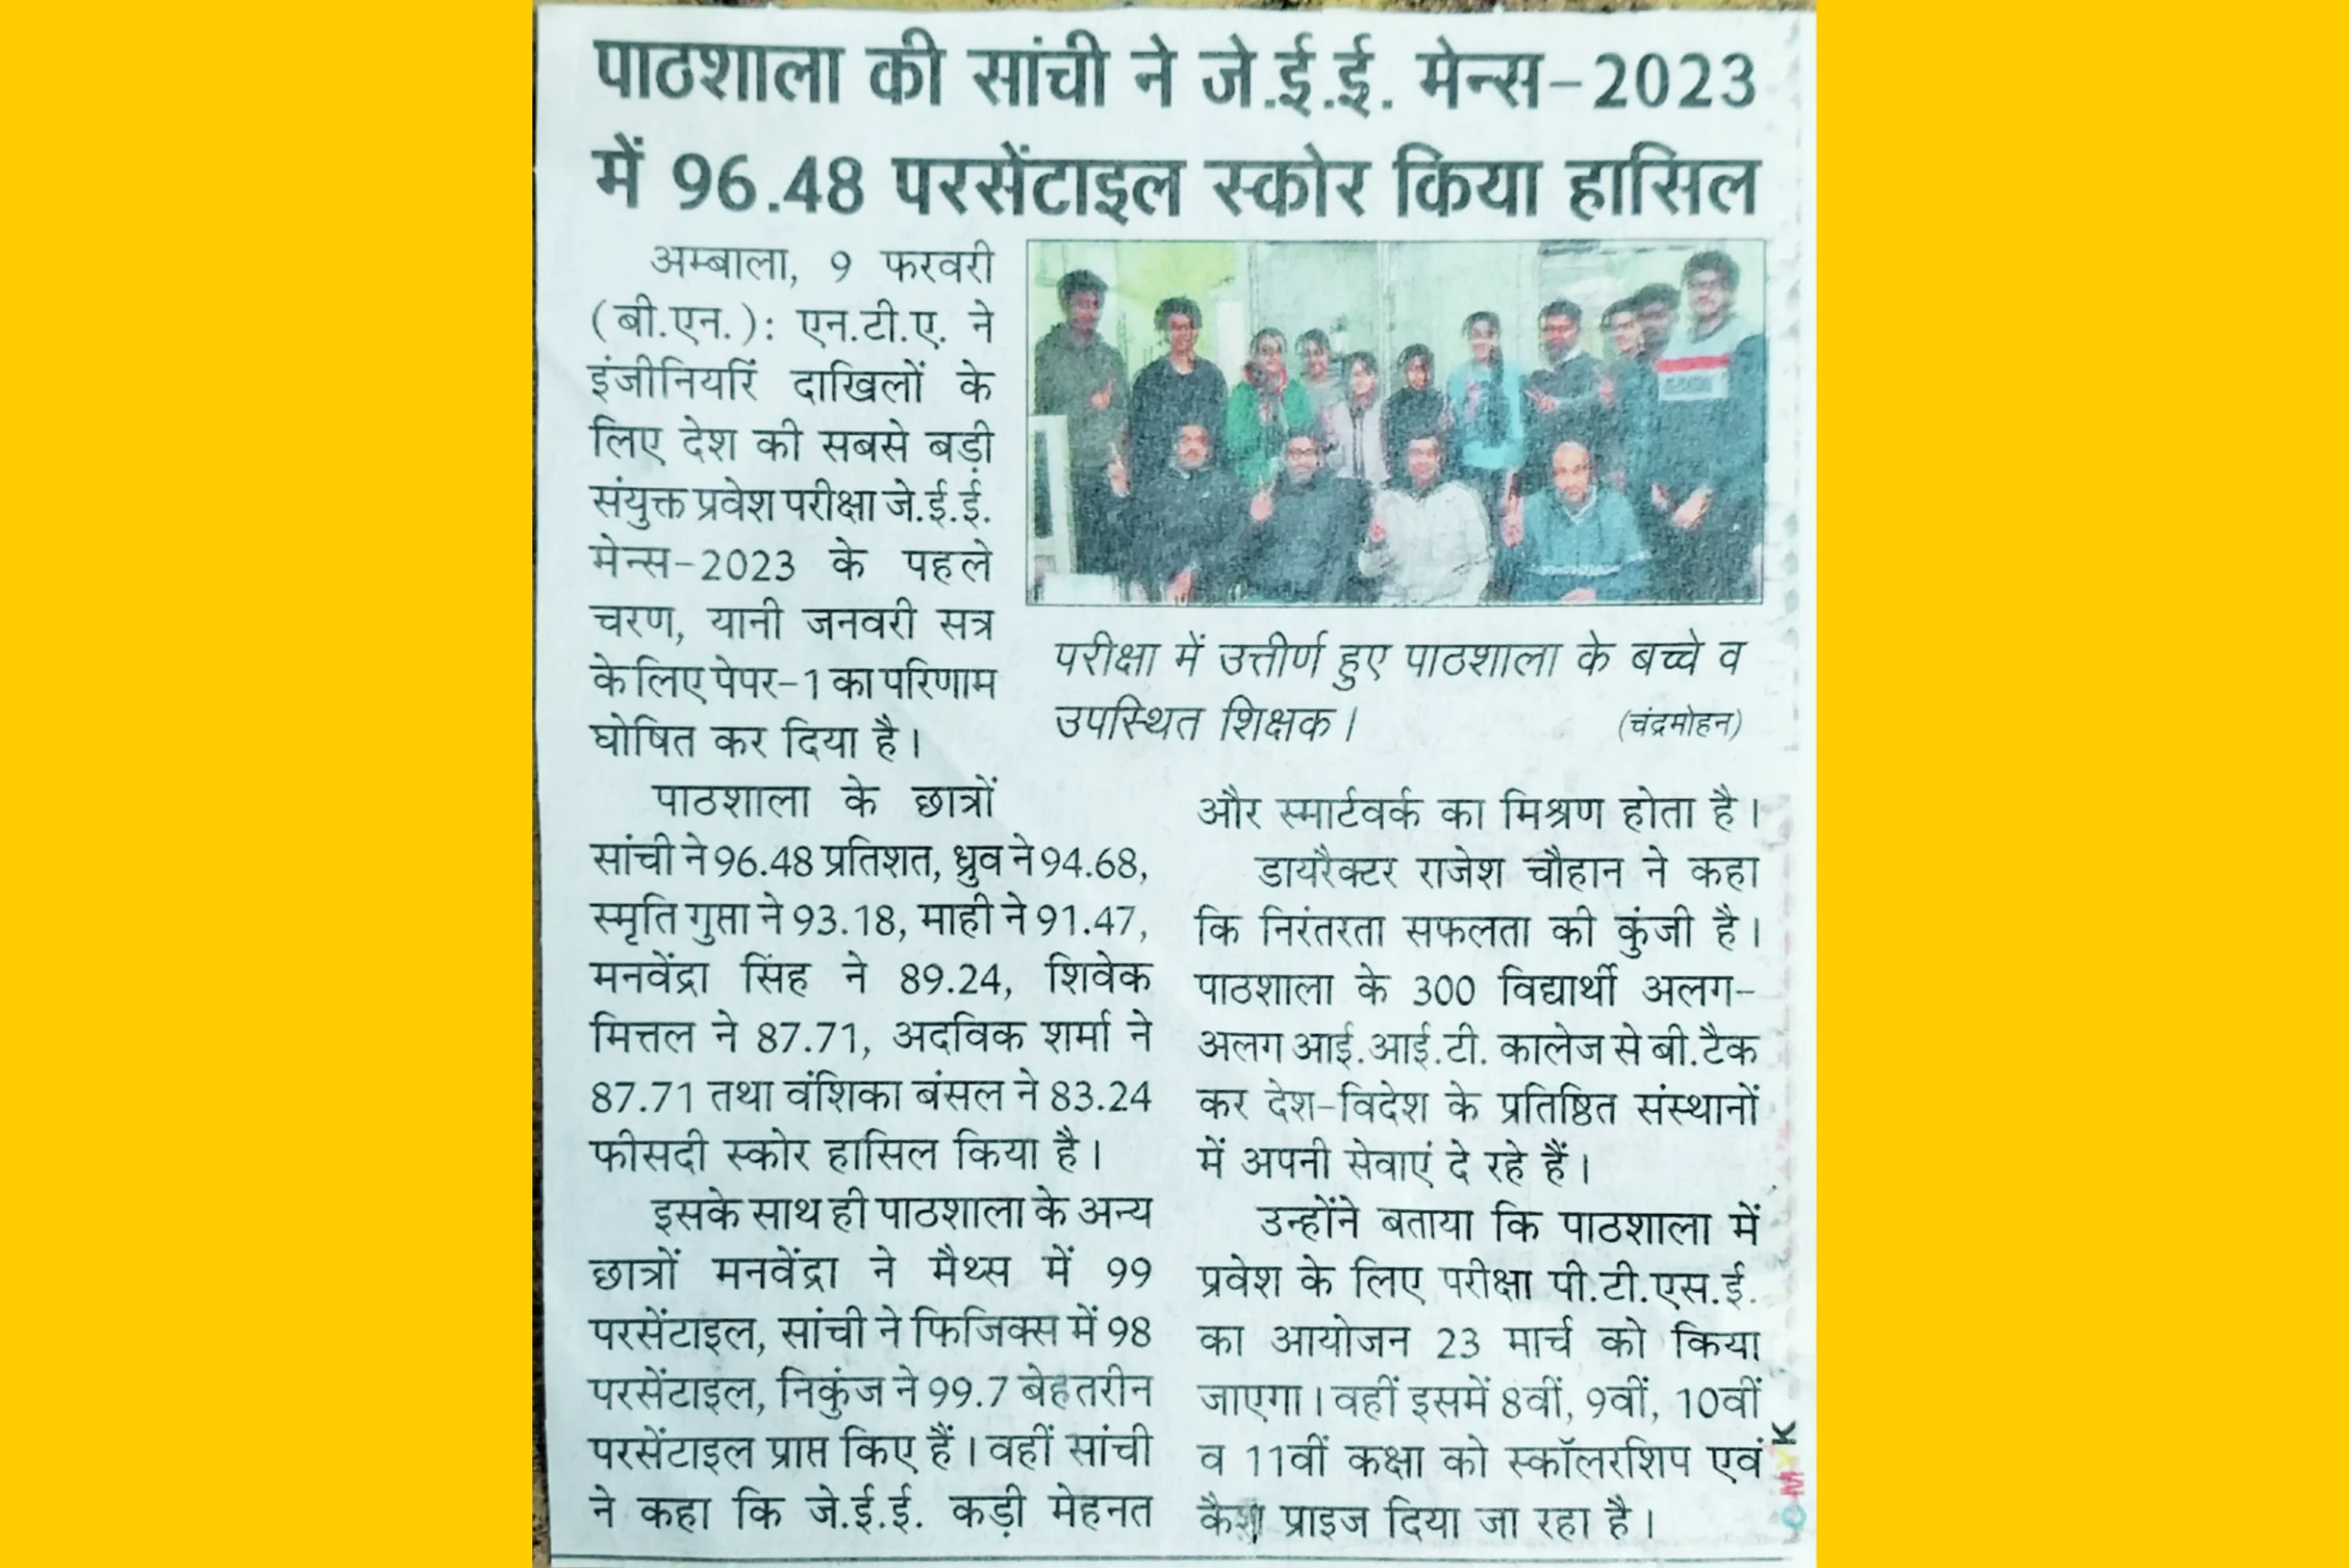 Paathshala Coaching results featured in newspaper 6